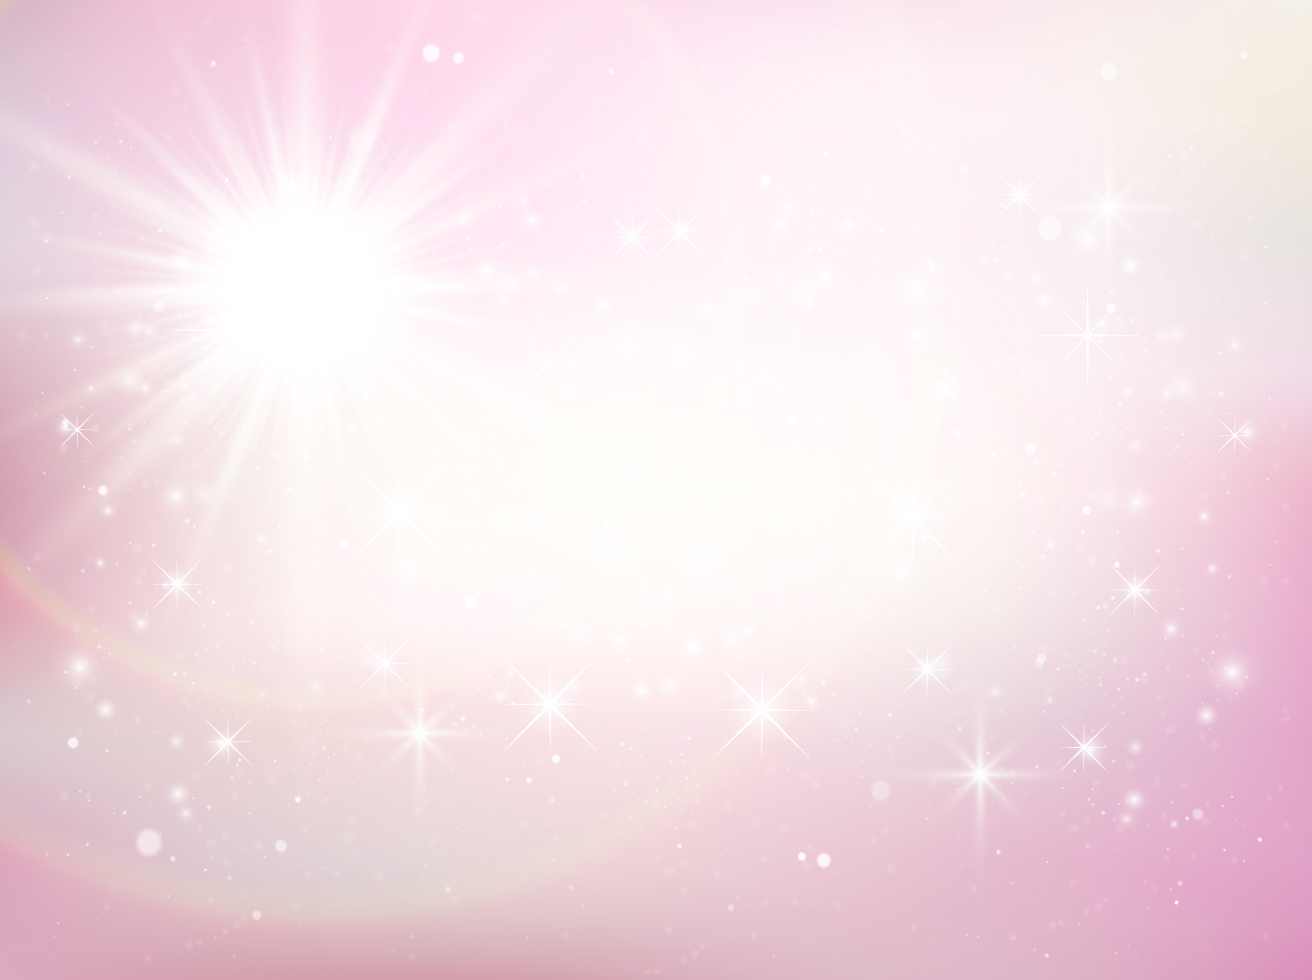 Beautiful Pink Sparkles Background Vector Art & Graphics ...